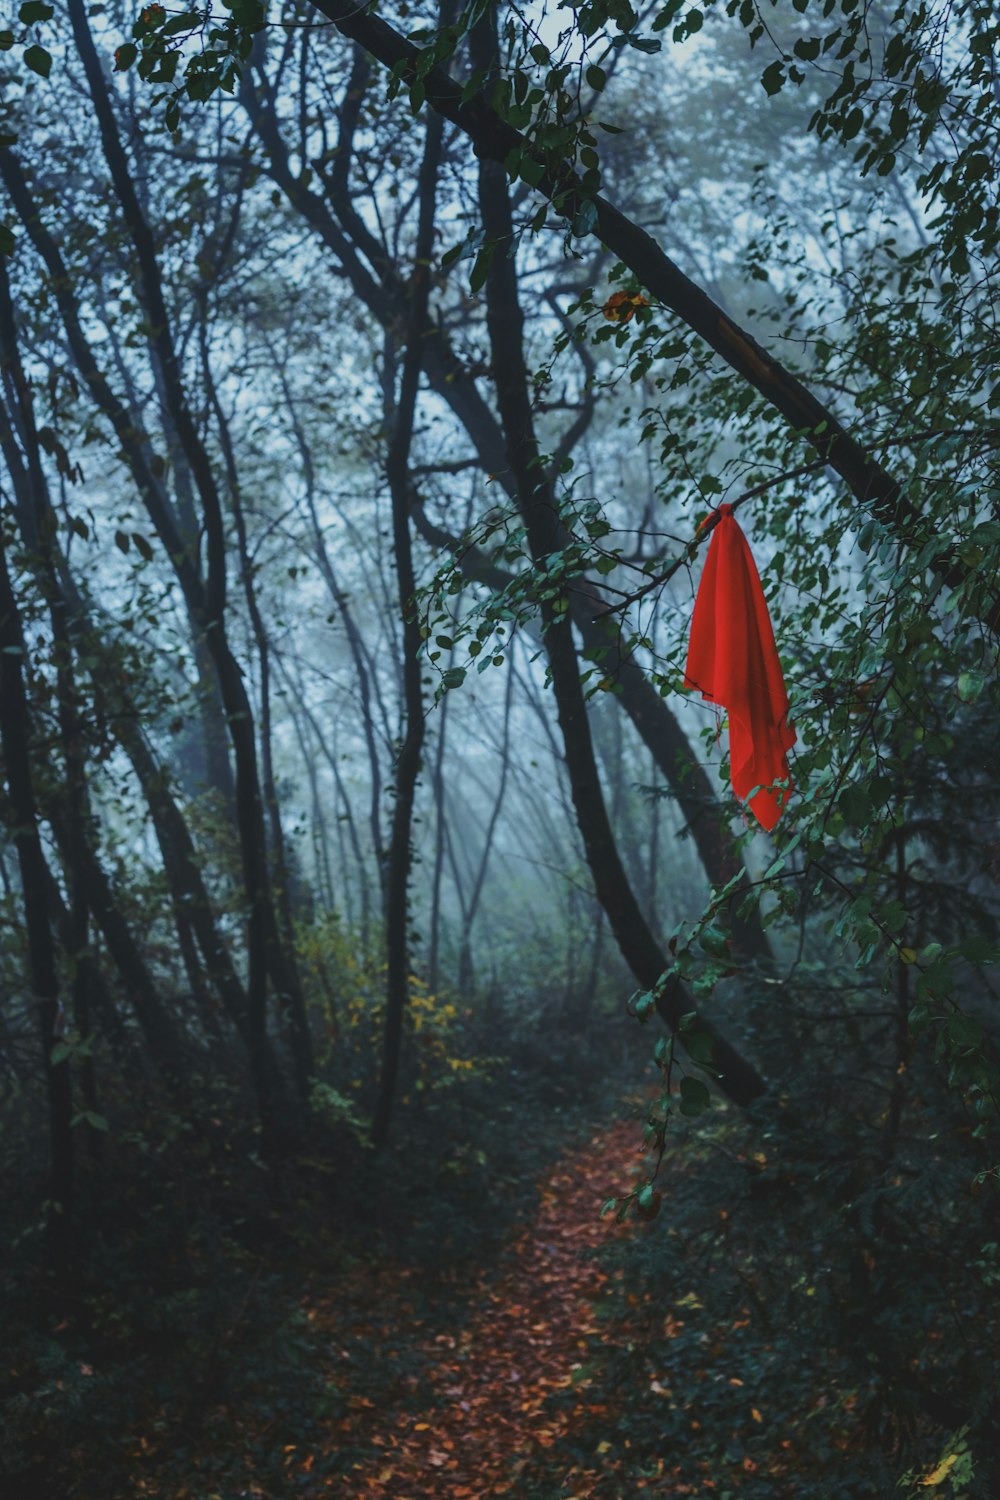 A red blanket hanging from a tree in a forest.